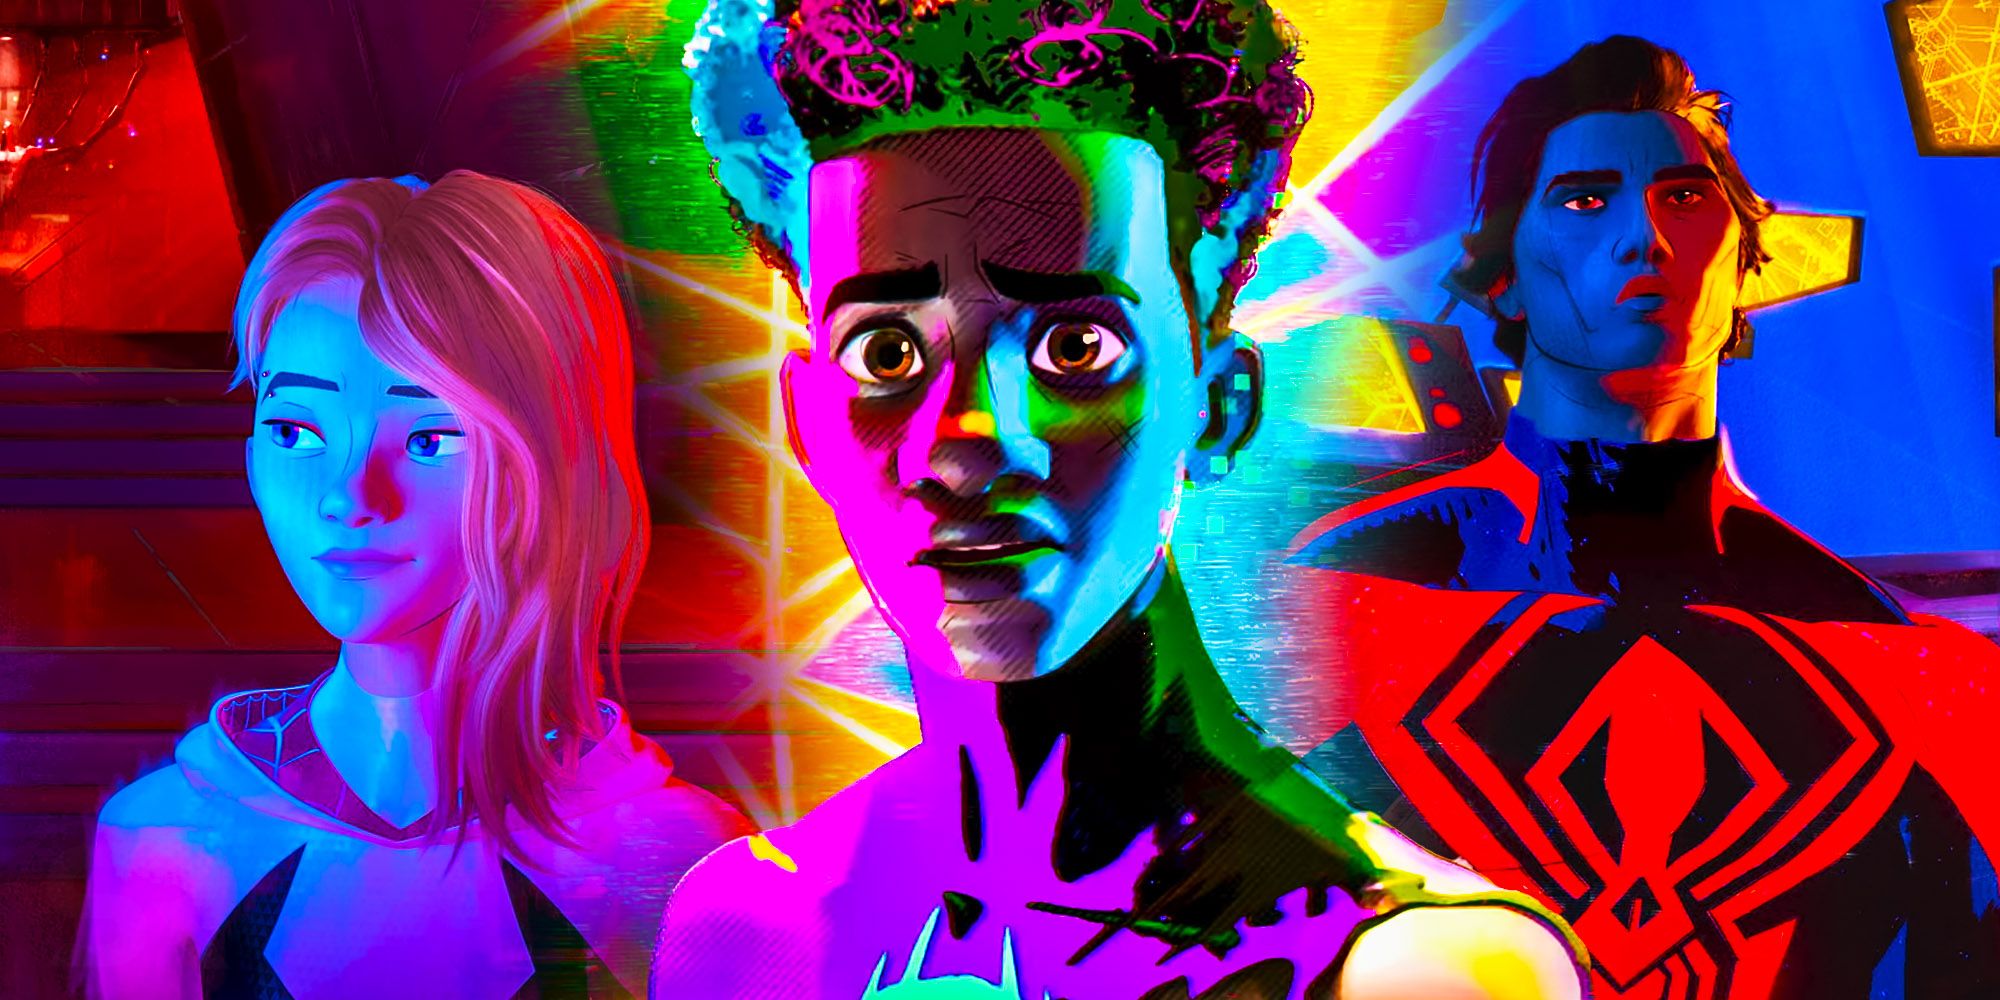 exclusive-insider-report-final-spiderverse-film-faces-delay-march-2024-release-date-in-jeopardy